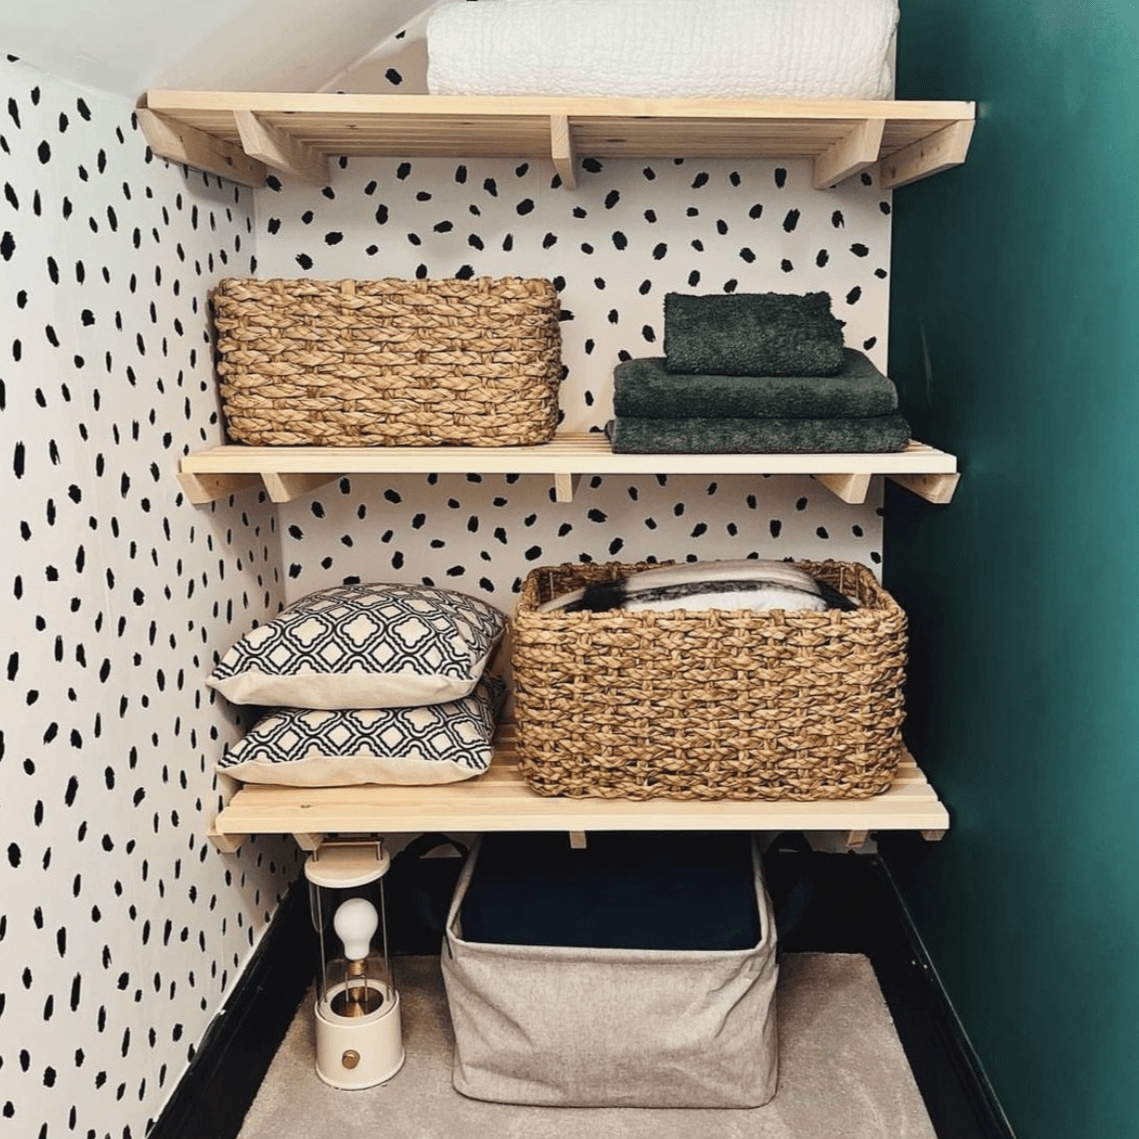 Airing Cupboard Shelves - Made To Measure